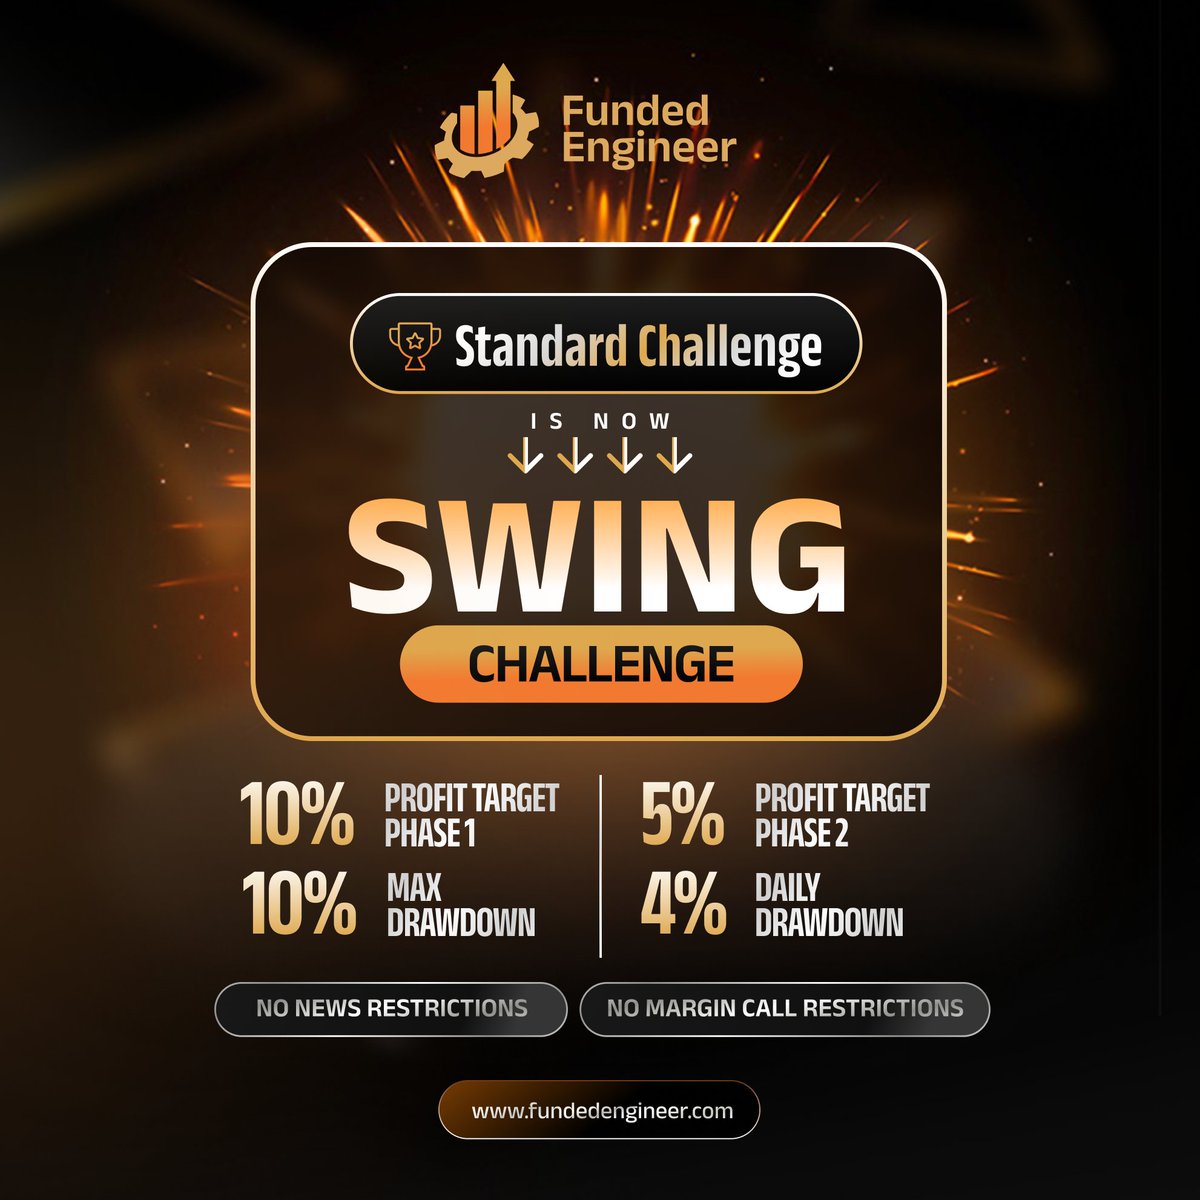 Our Standard Challenge is now Swing Challenge! 👀 🎯 Phase 1: 10% profit target 🎯 Phase 2: 5% profit target 📉 10% Max DD 📉 4% Daily DD 👉 No news restrictions 👉 No margin call restrictions 👉 Trading leverage 1:20 #FundedEngineer